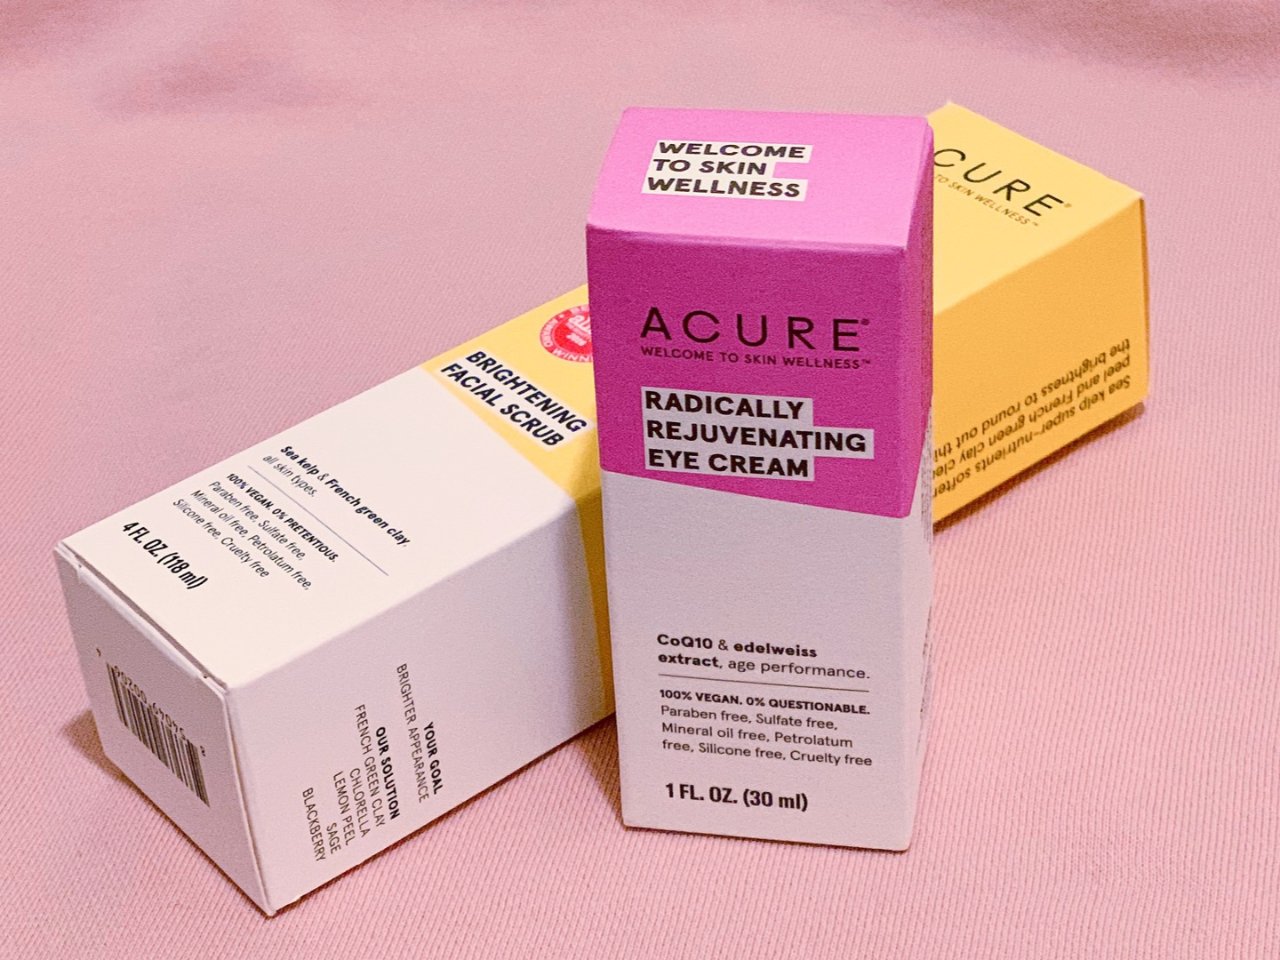 Acure,Target 塔吉特百货